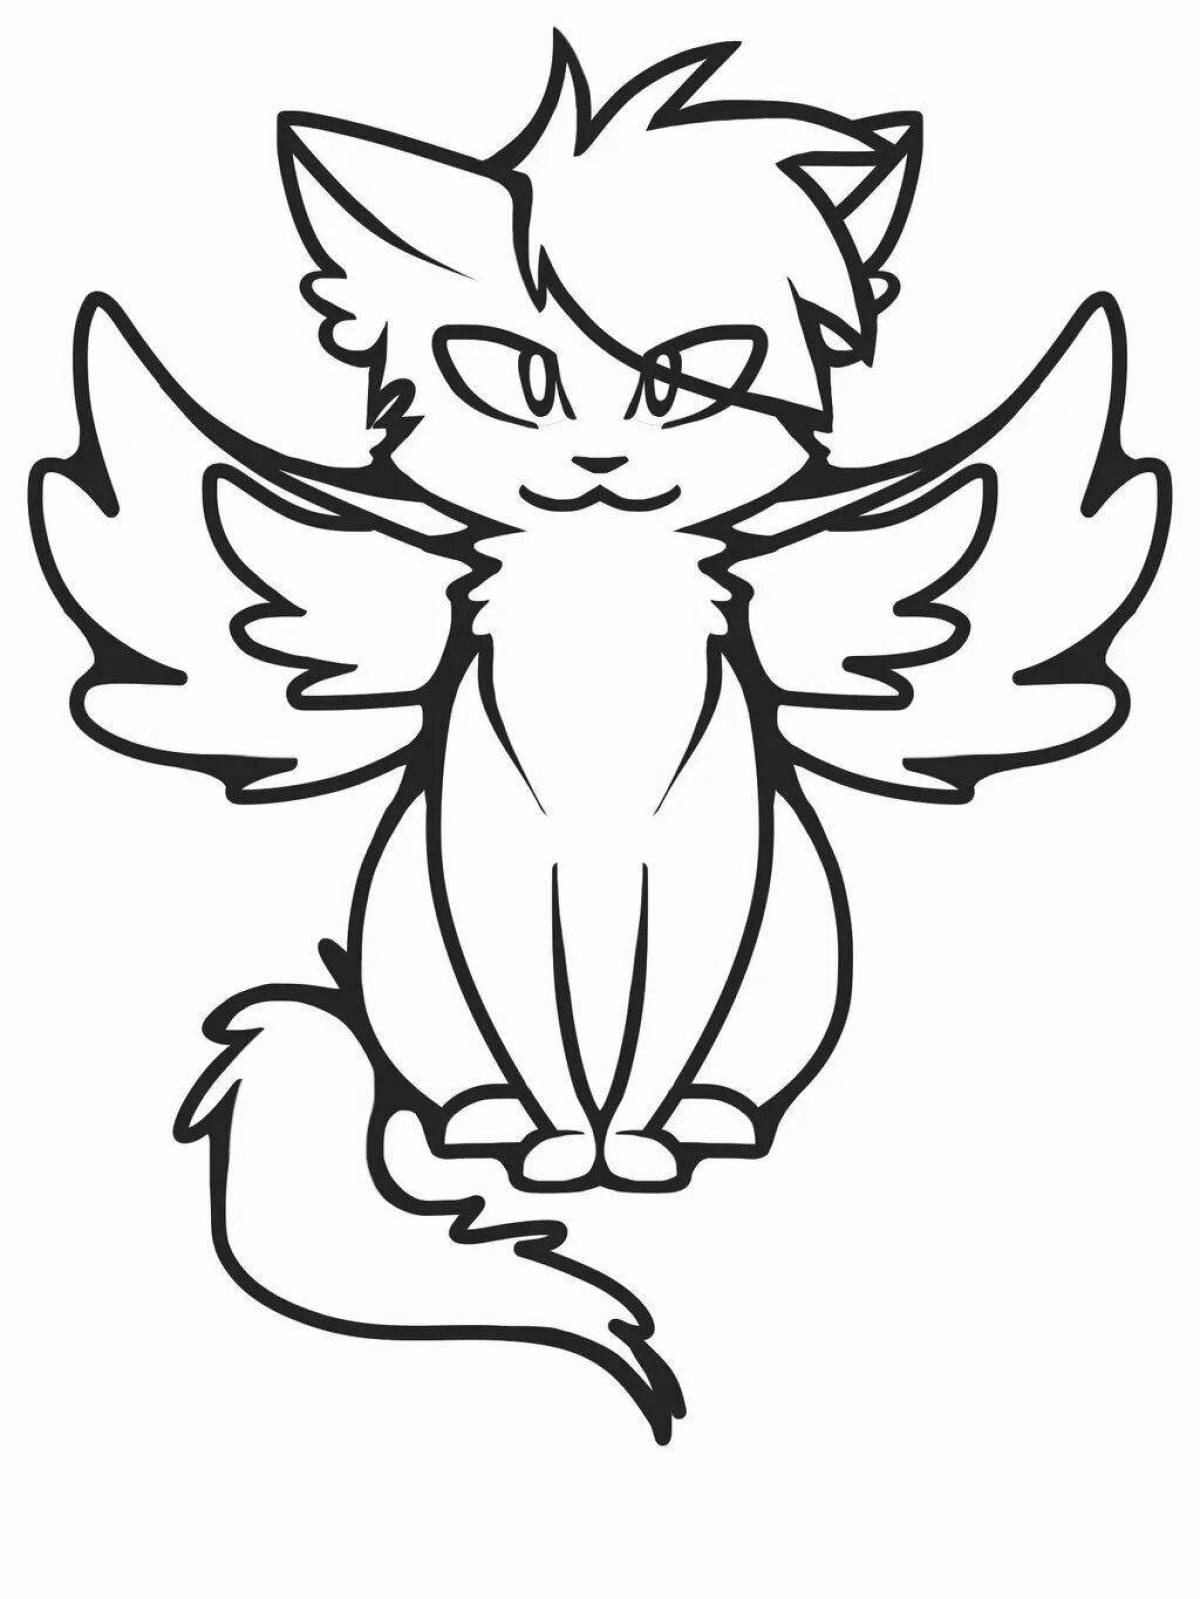 Coloring book playful flying cat